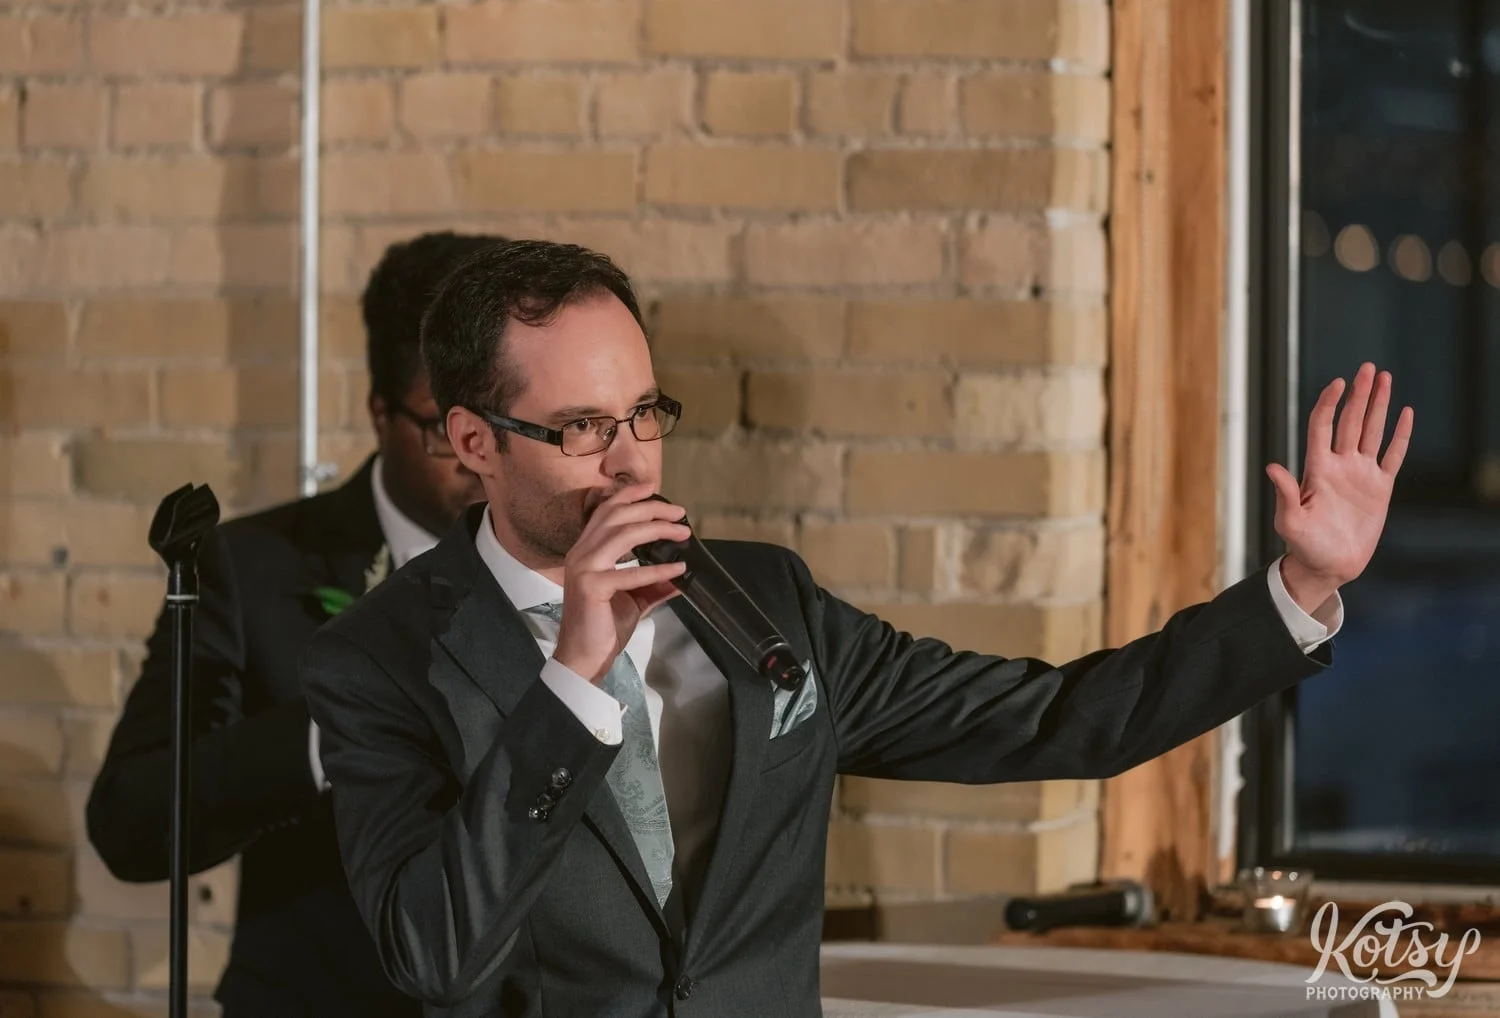 A man in a black suit and green tie speaks into a microphone with his hand in the air during a Second Floor Events wedding reception in Toronto, Canada.